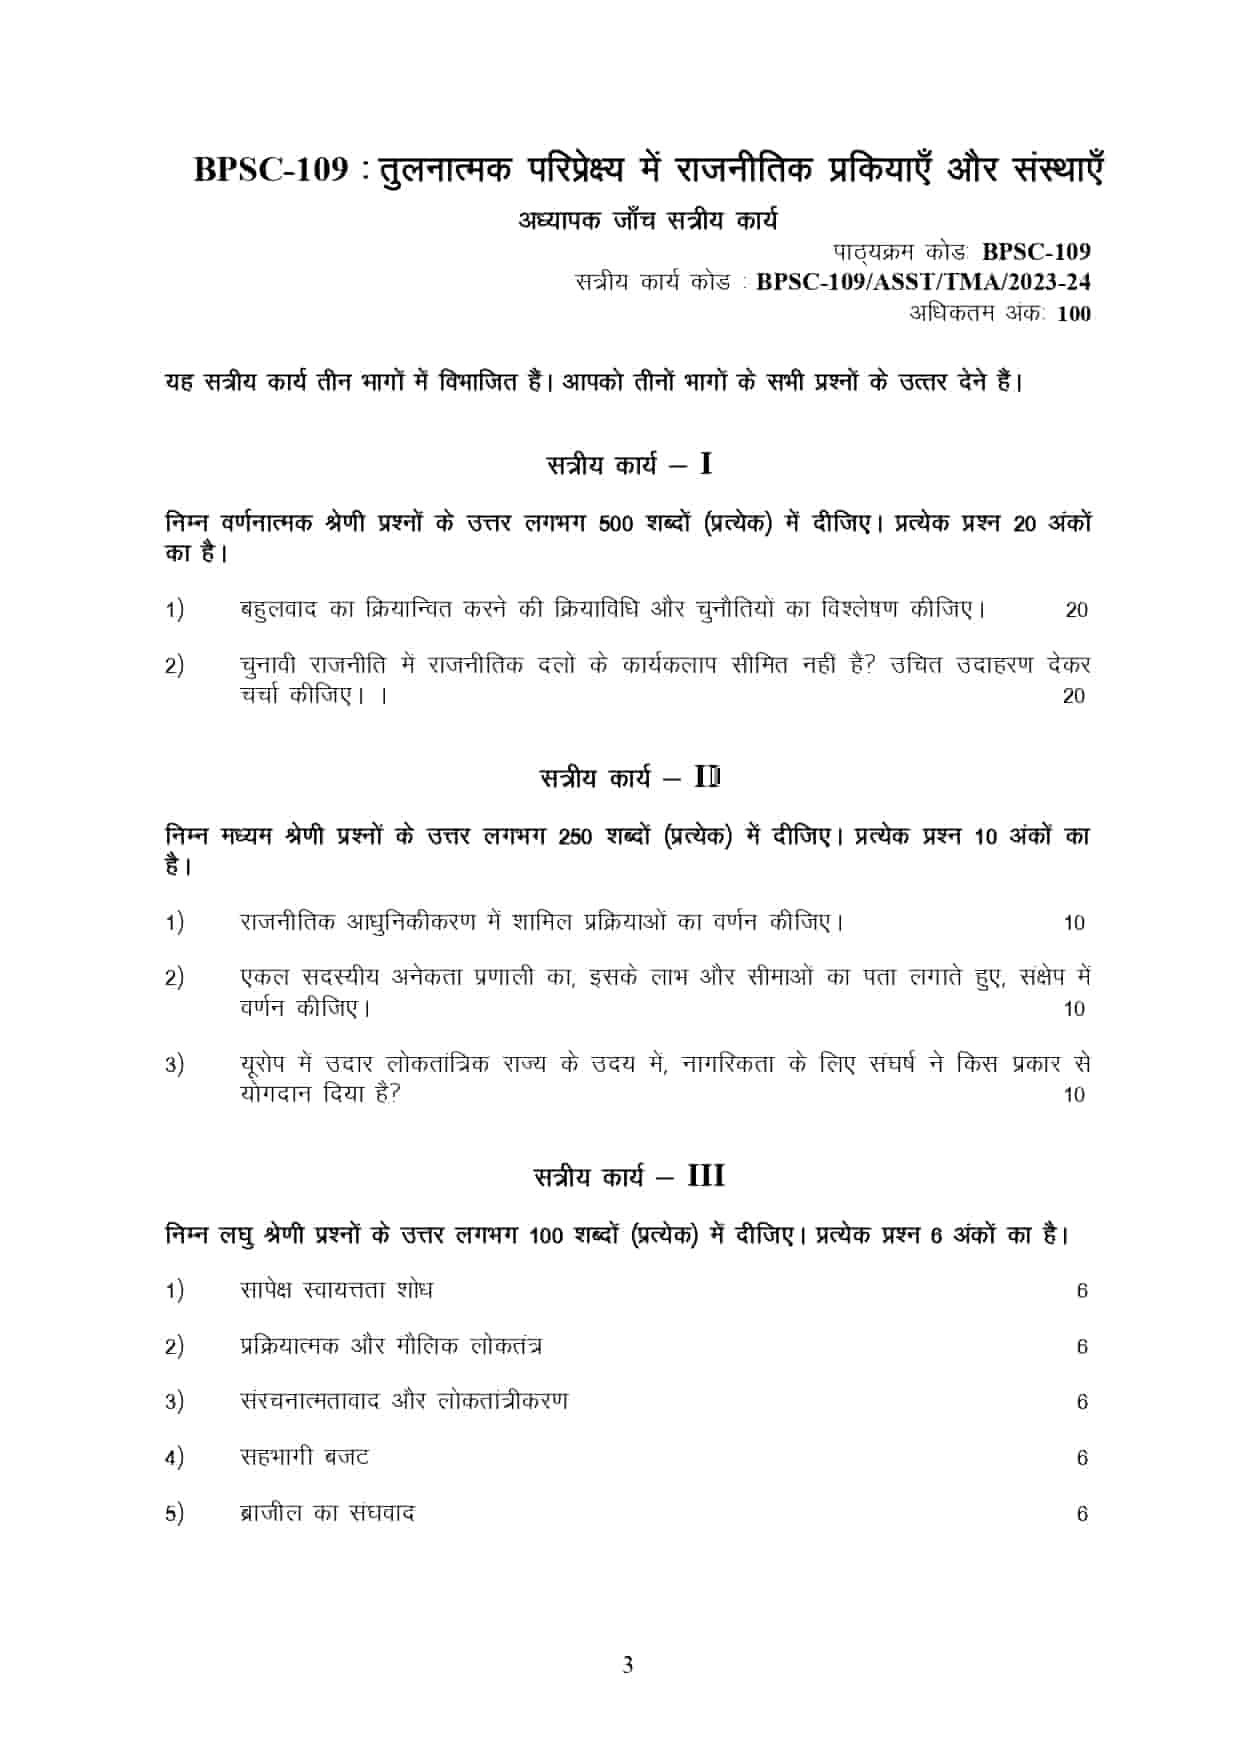 IGNOU BPSC 109 HINDI SOLVED ASSIGNMENT 2023-24